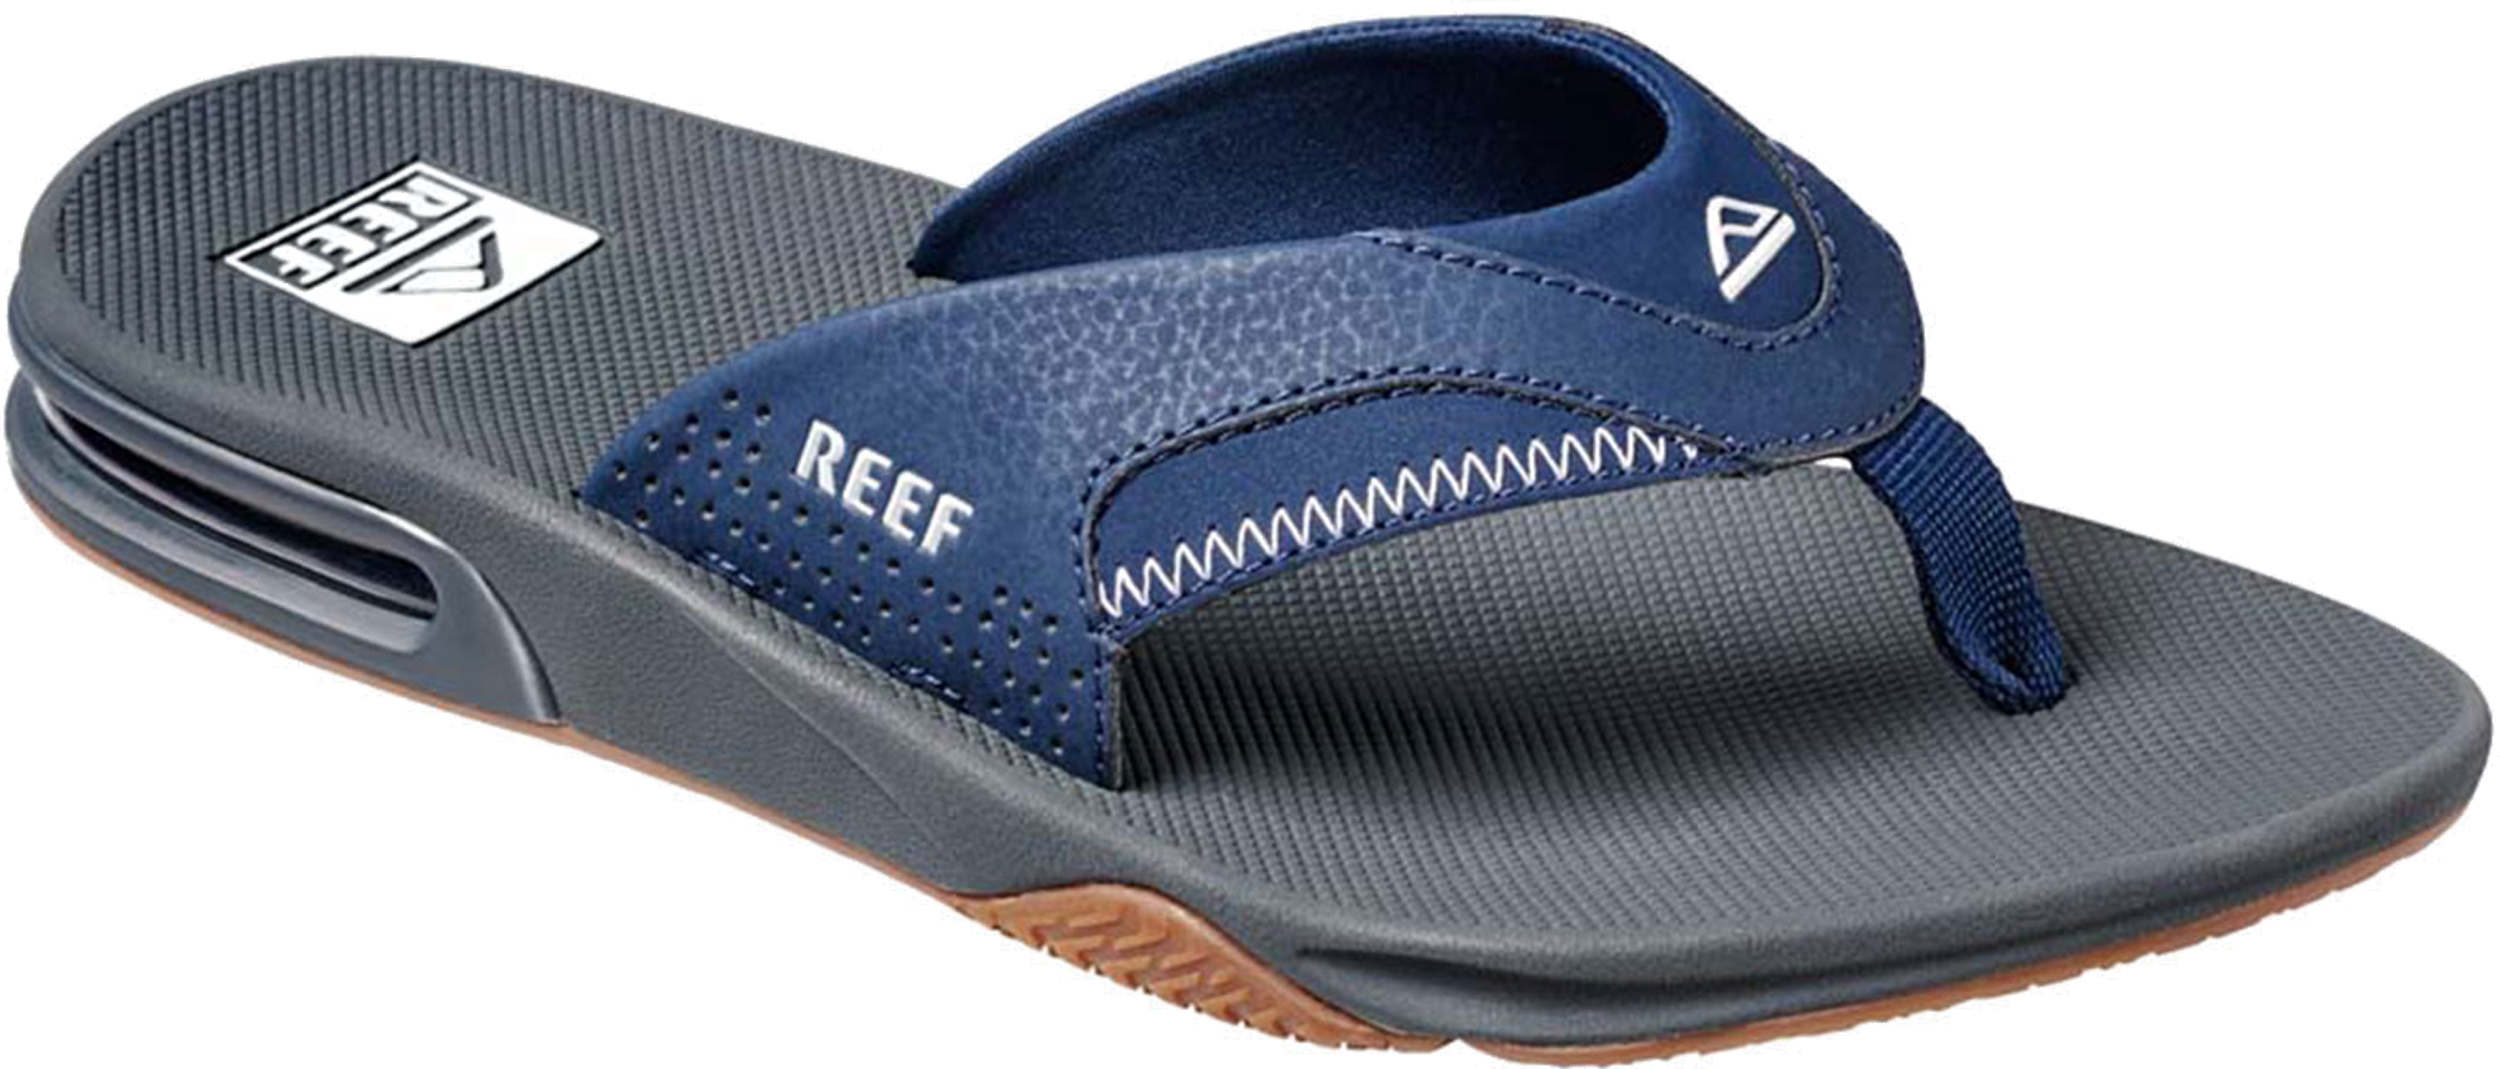 Reef Navy/Shadow Fanning size 10